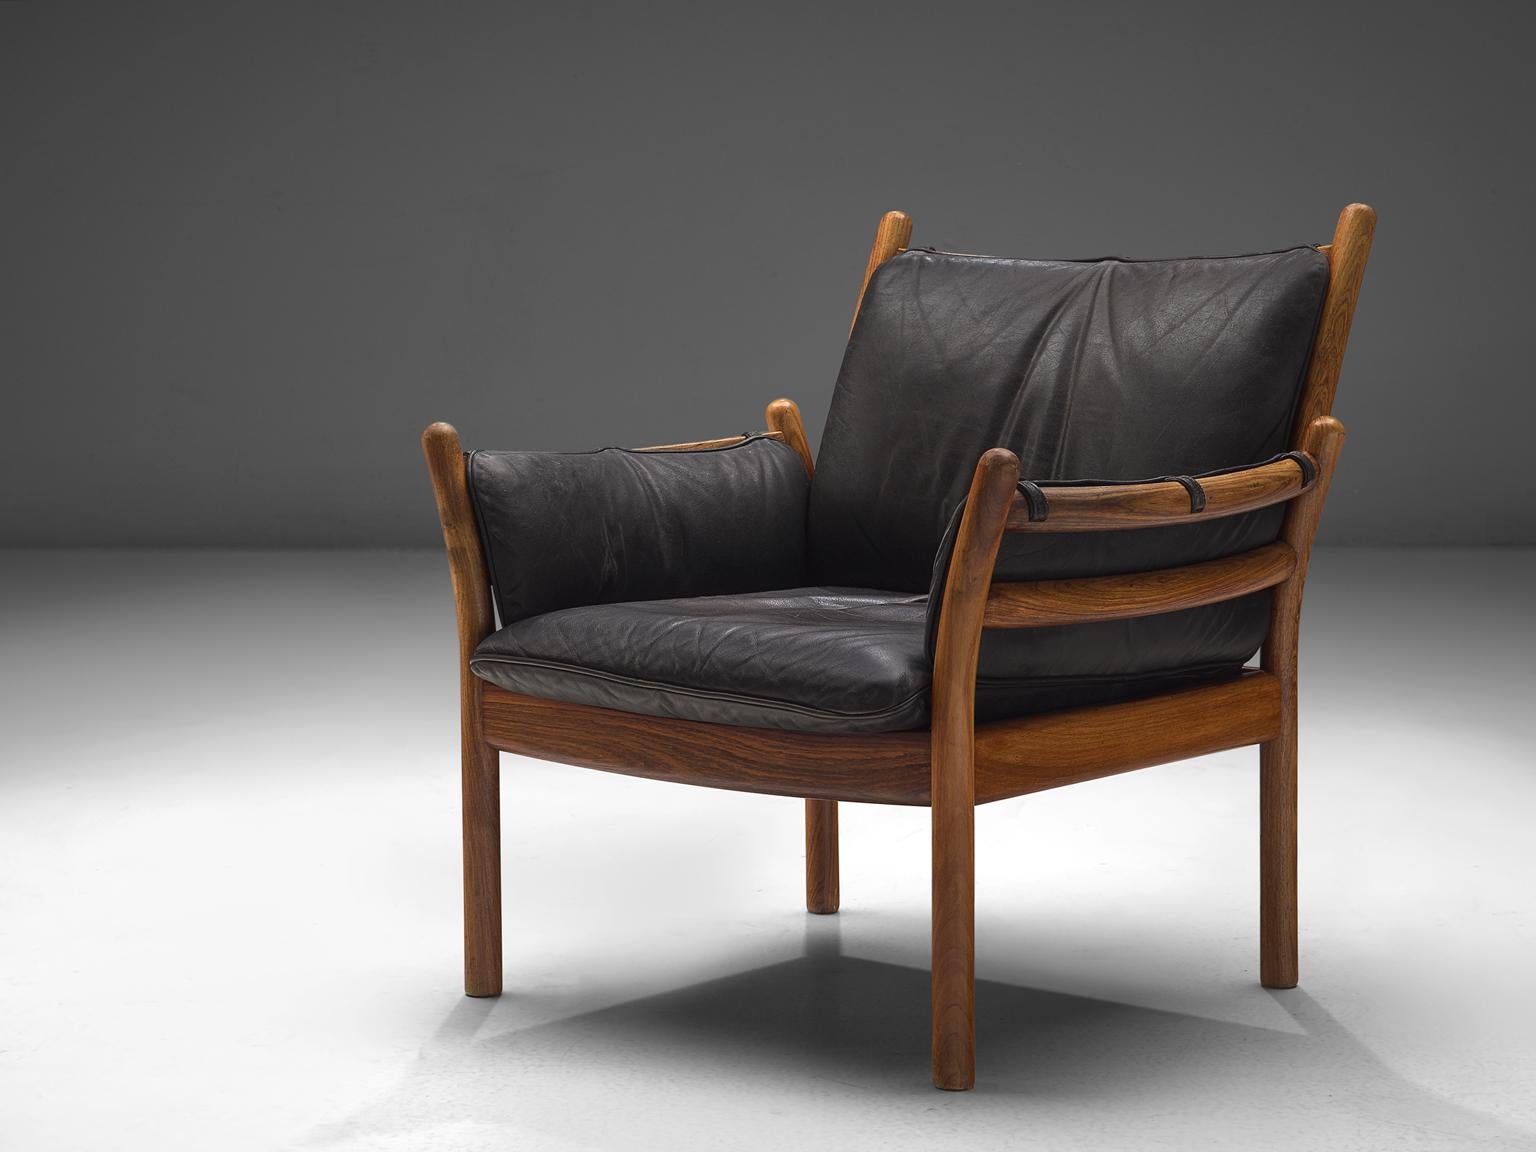 Illum Wikkelsø by CFC Silkeborg, 'Genius' chair, leather and rosewood, Denmark, 1950s.

This chair is made out of solid rosewood and features a cognac leather cushion on both seat and back. The chair is created as a sort of slatted rosewood